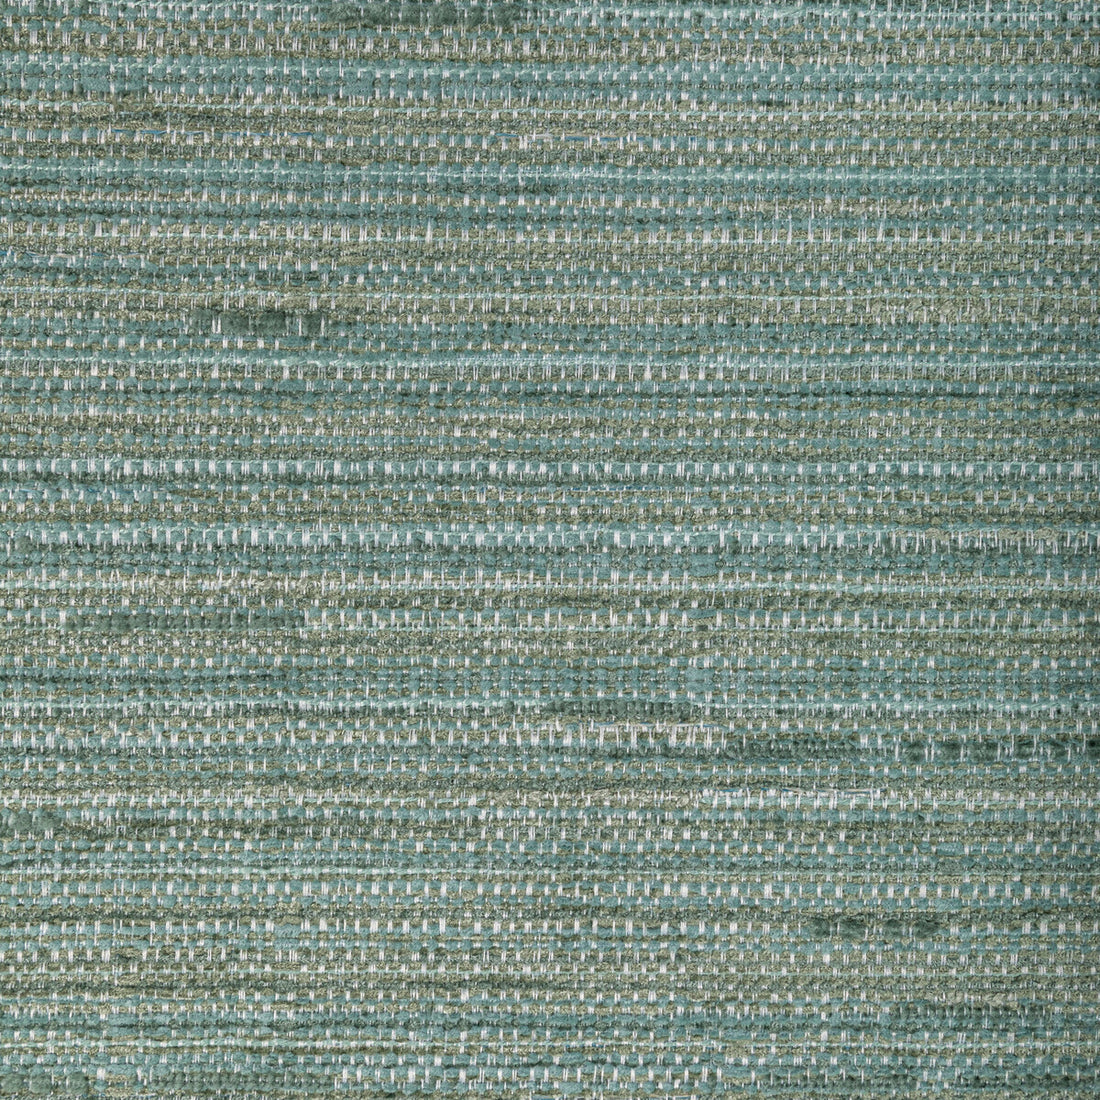 Reclaim fabric in seaglass color - pattern 36566.3.0 - by Kravet Contract in the Seaqual collection